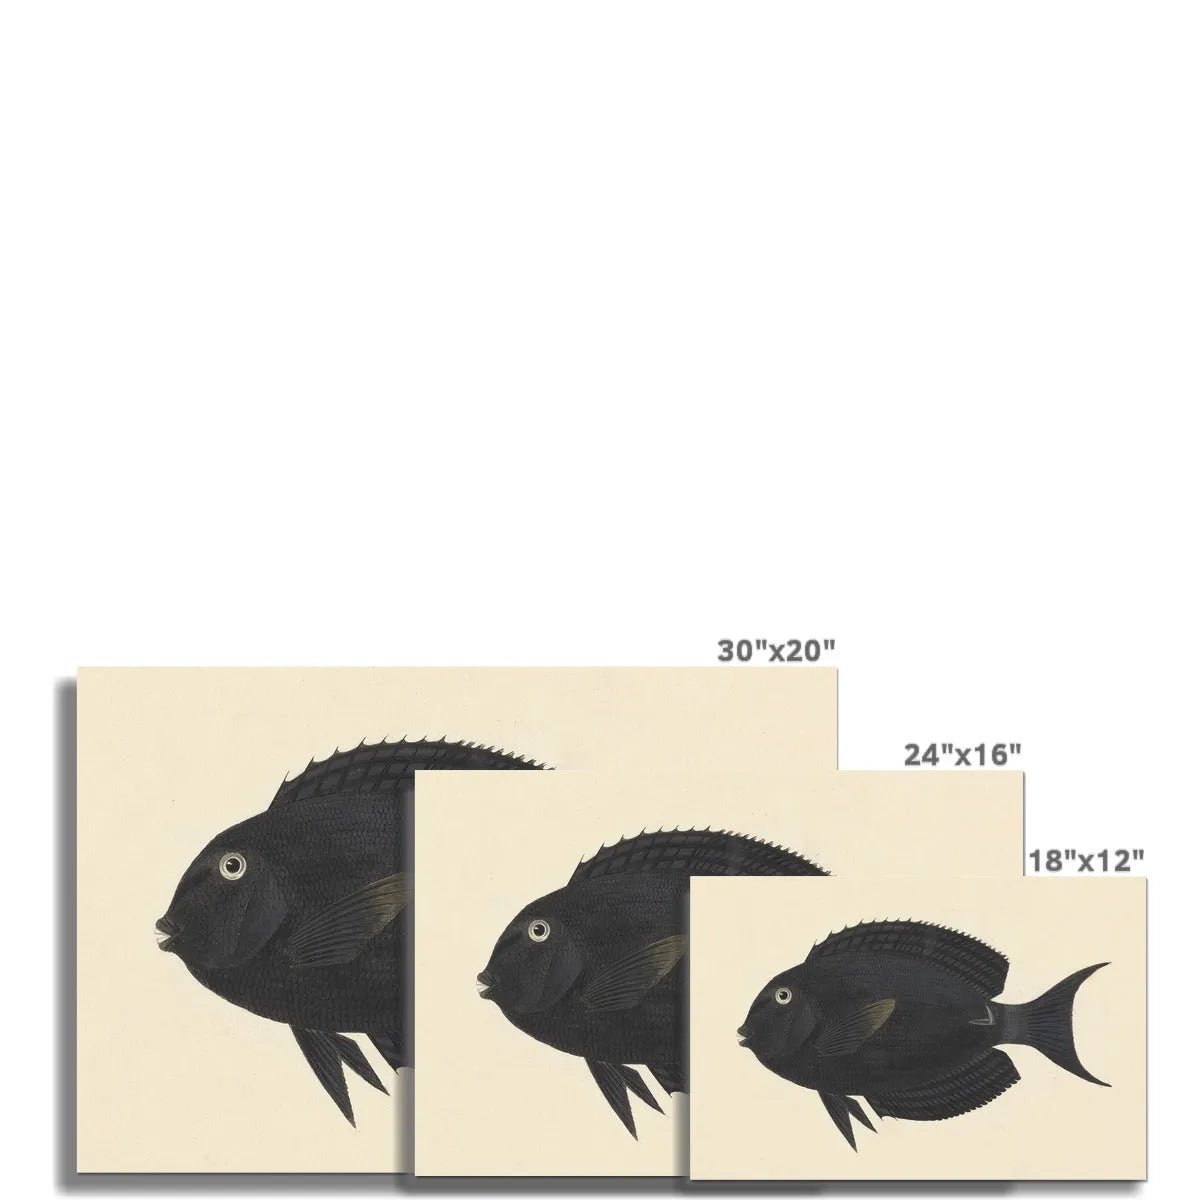 The Other Other Fish By Luigi Balugani Fine Art Print - Posters Prints & Visual Artwork - Aesthetic Art